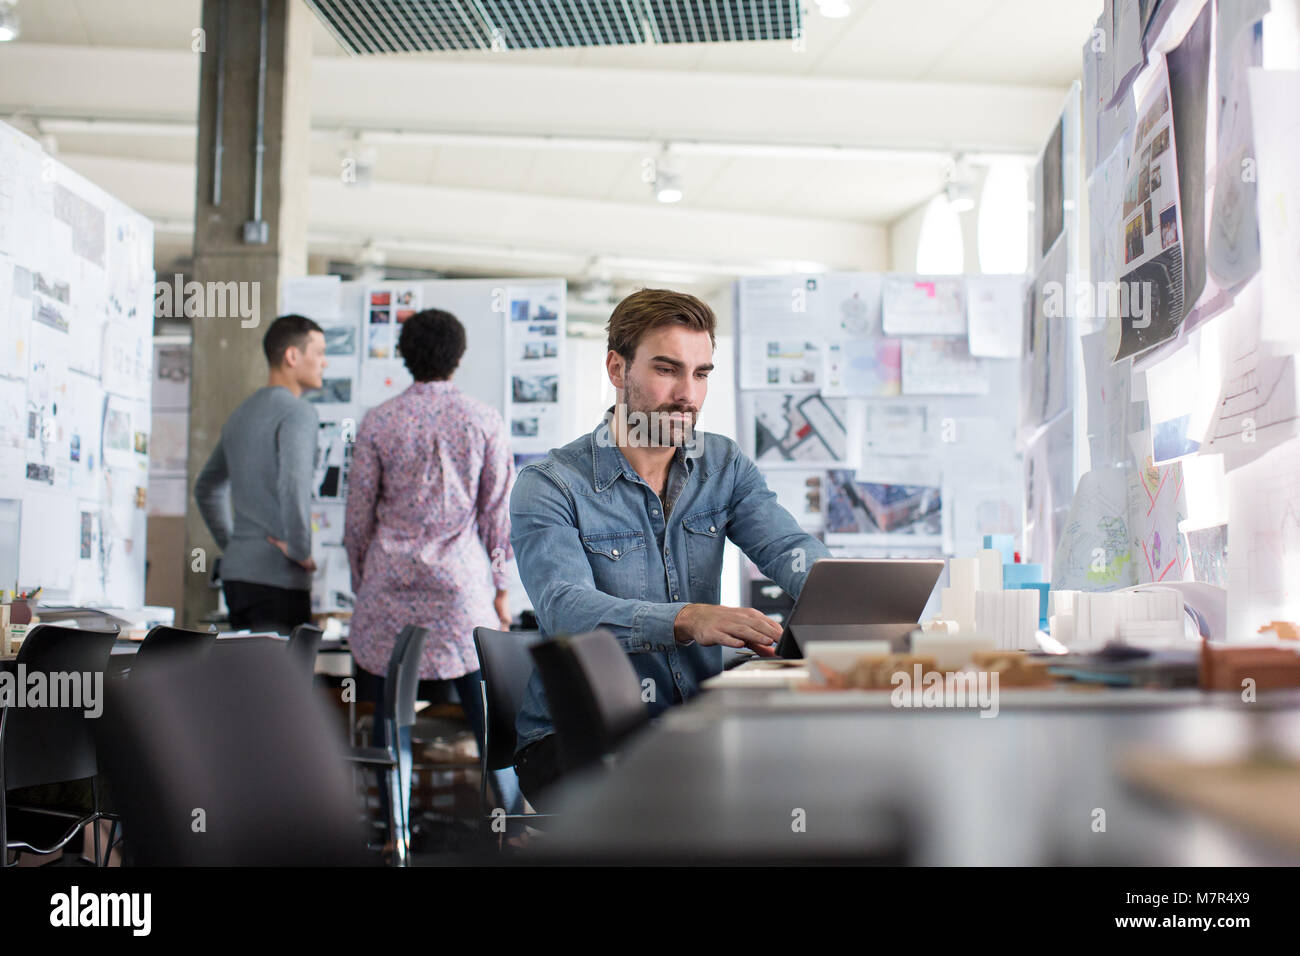 Designers working in an open plan office space Stock Photo